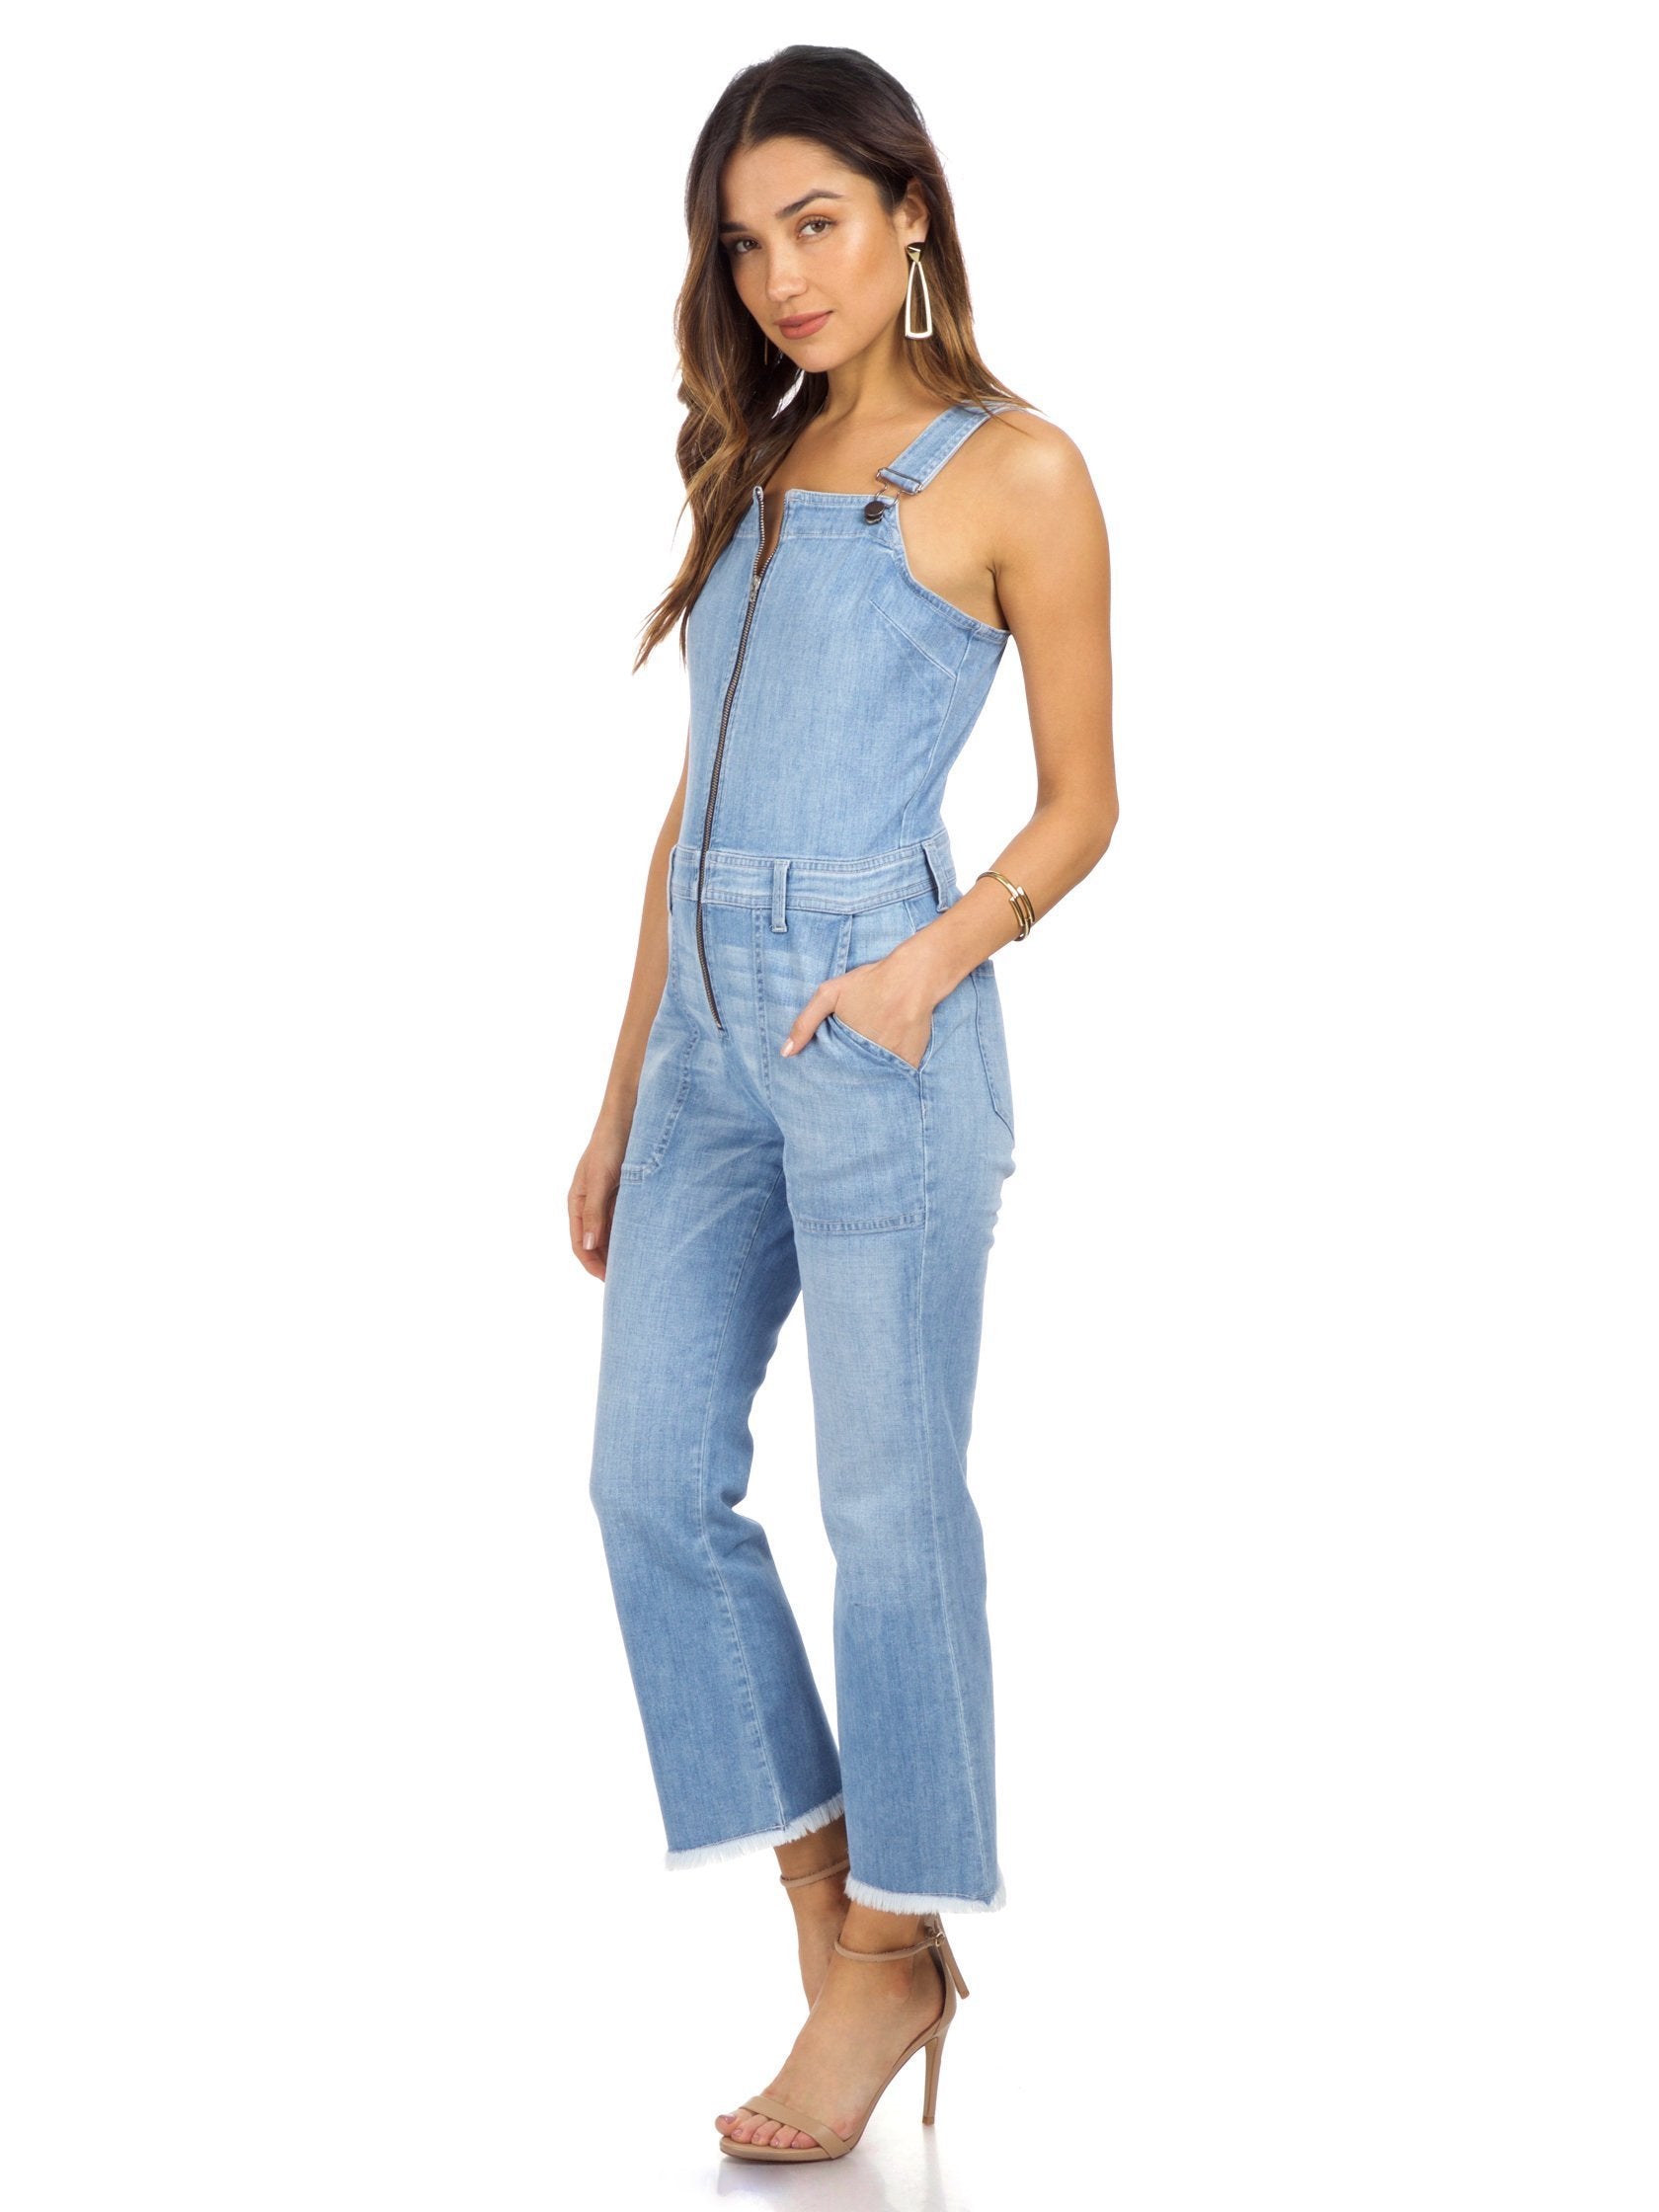 Woman wearing a jumpsuit rental from ei8ht dreams called Flare Overall